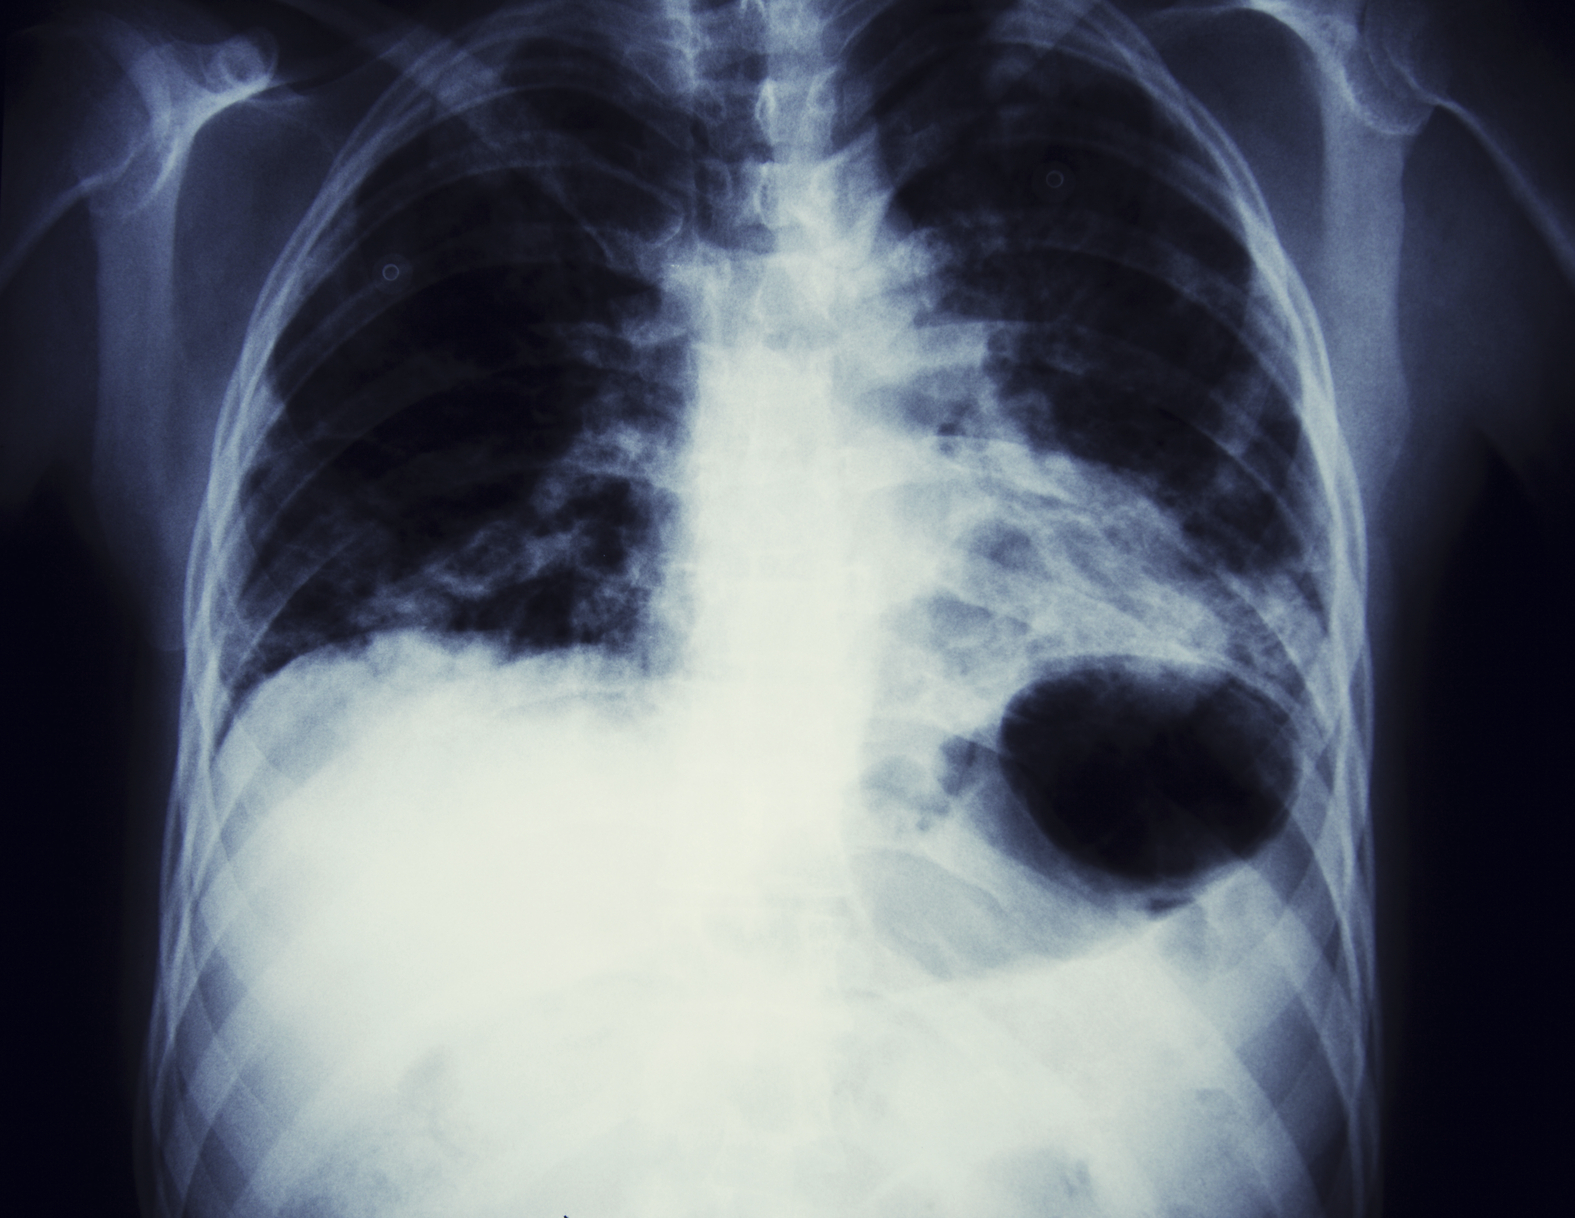 Asbestos-related lung cancer